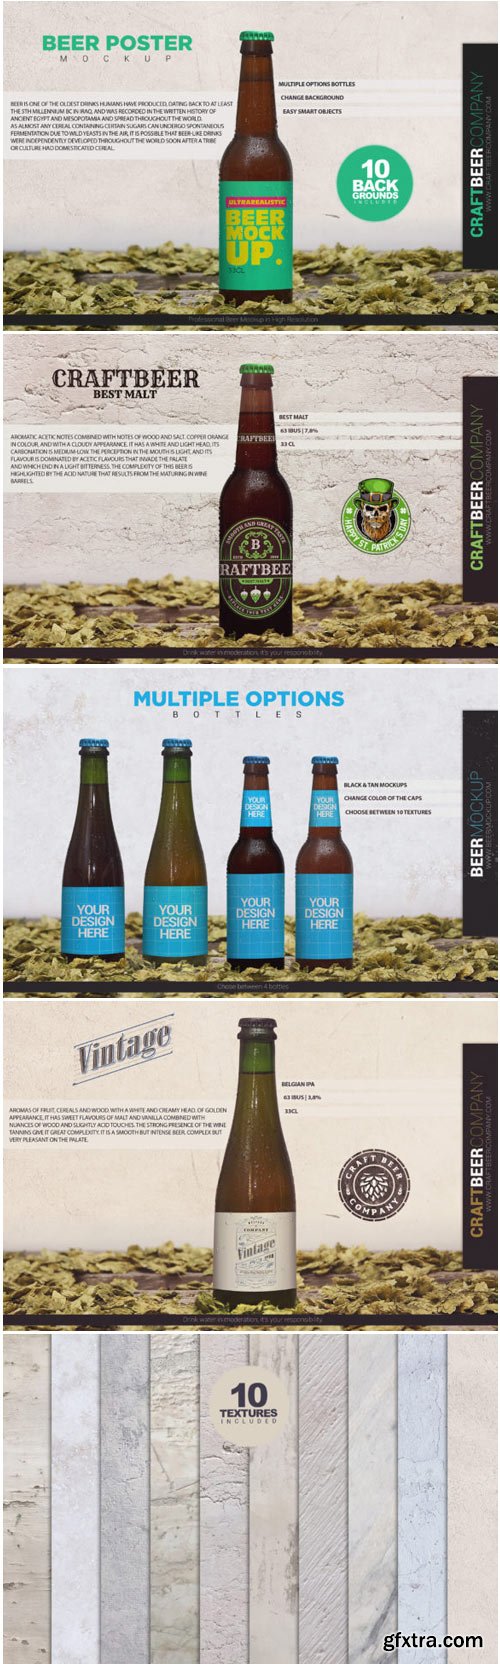 Beer Poster Template 1701522